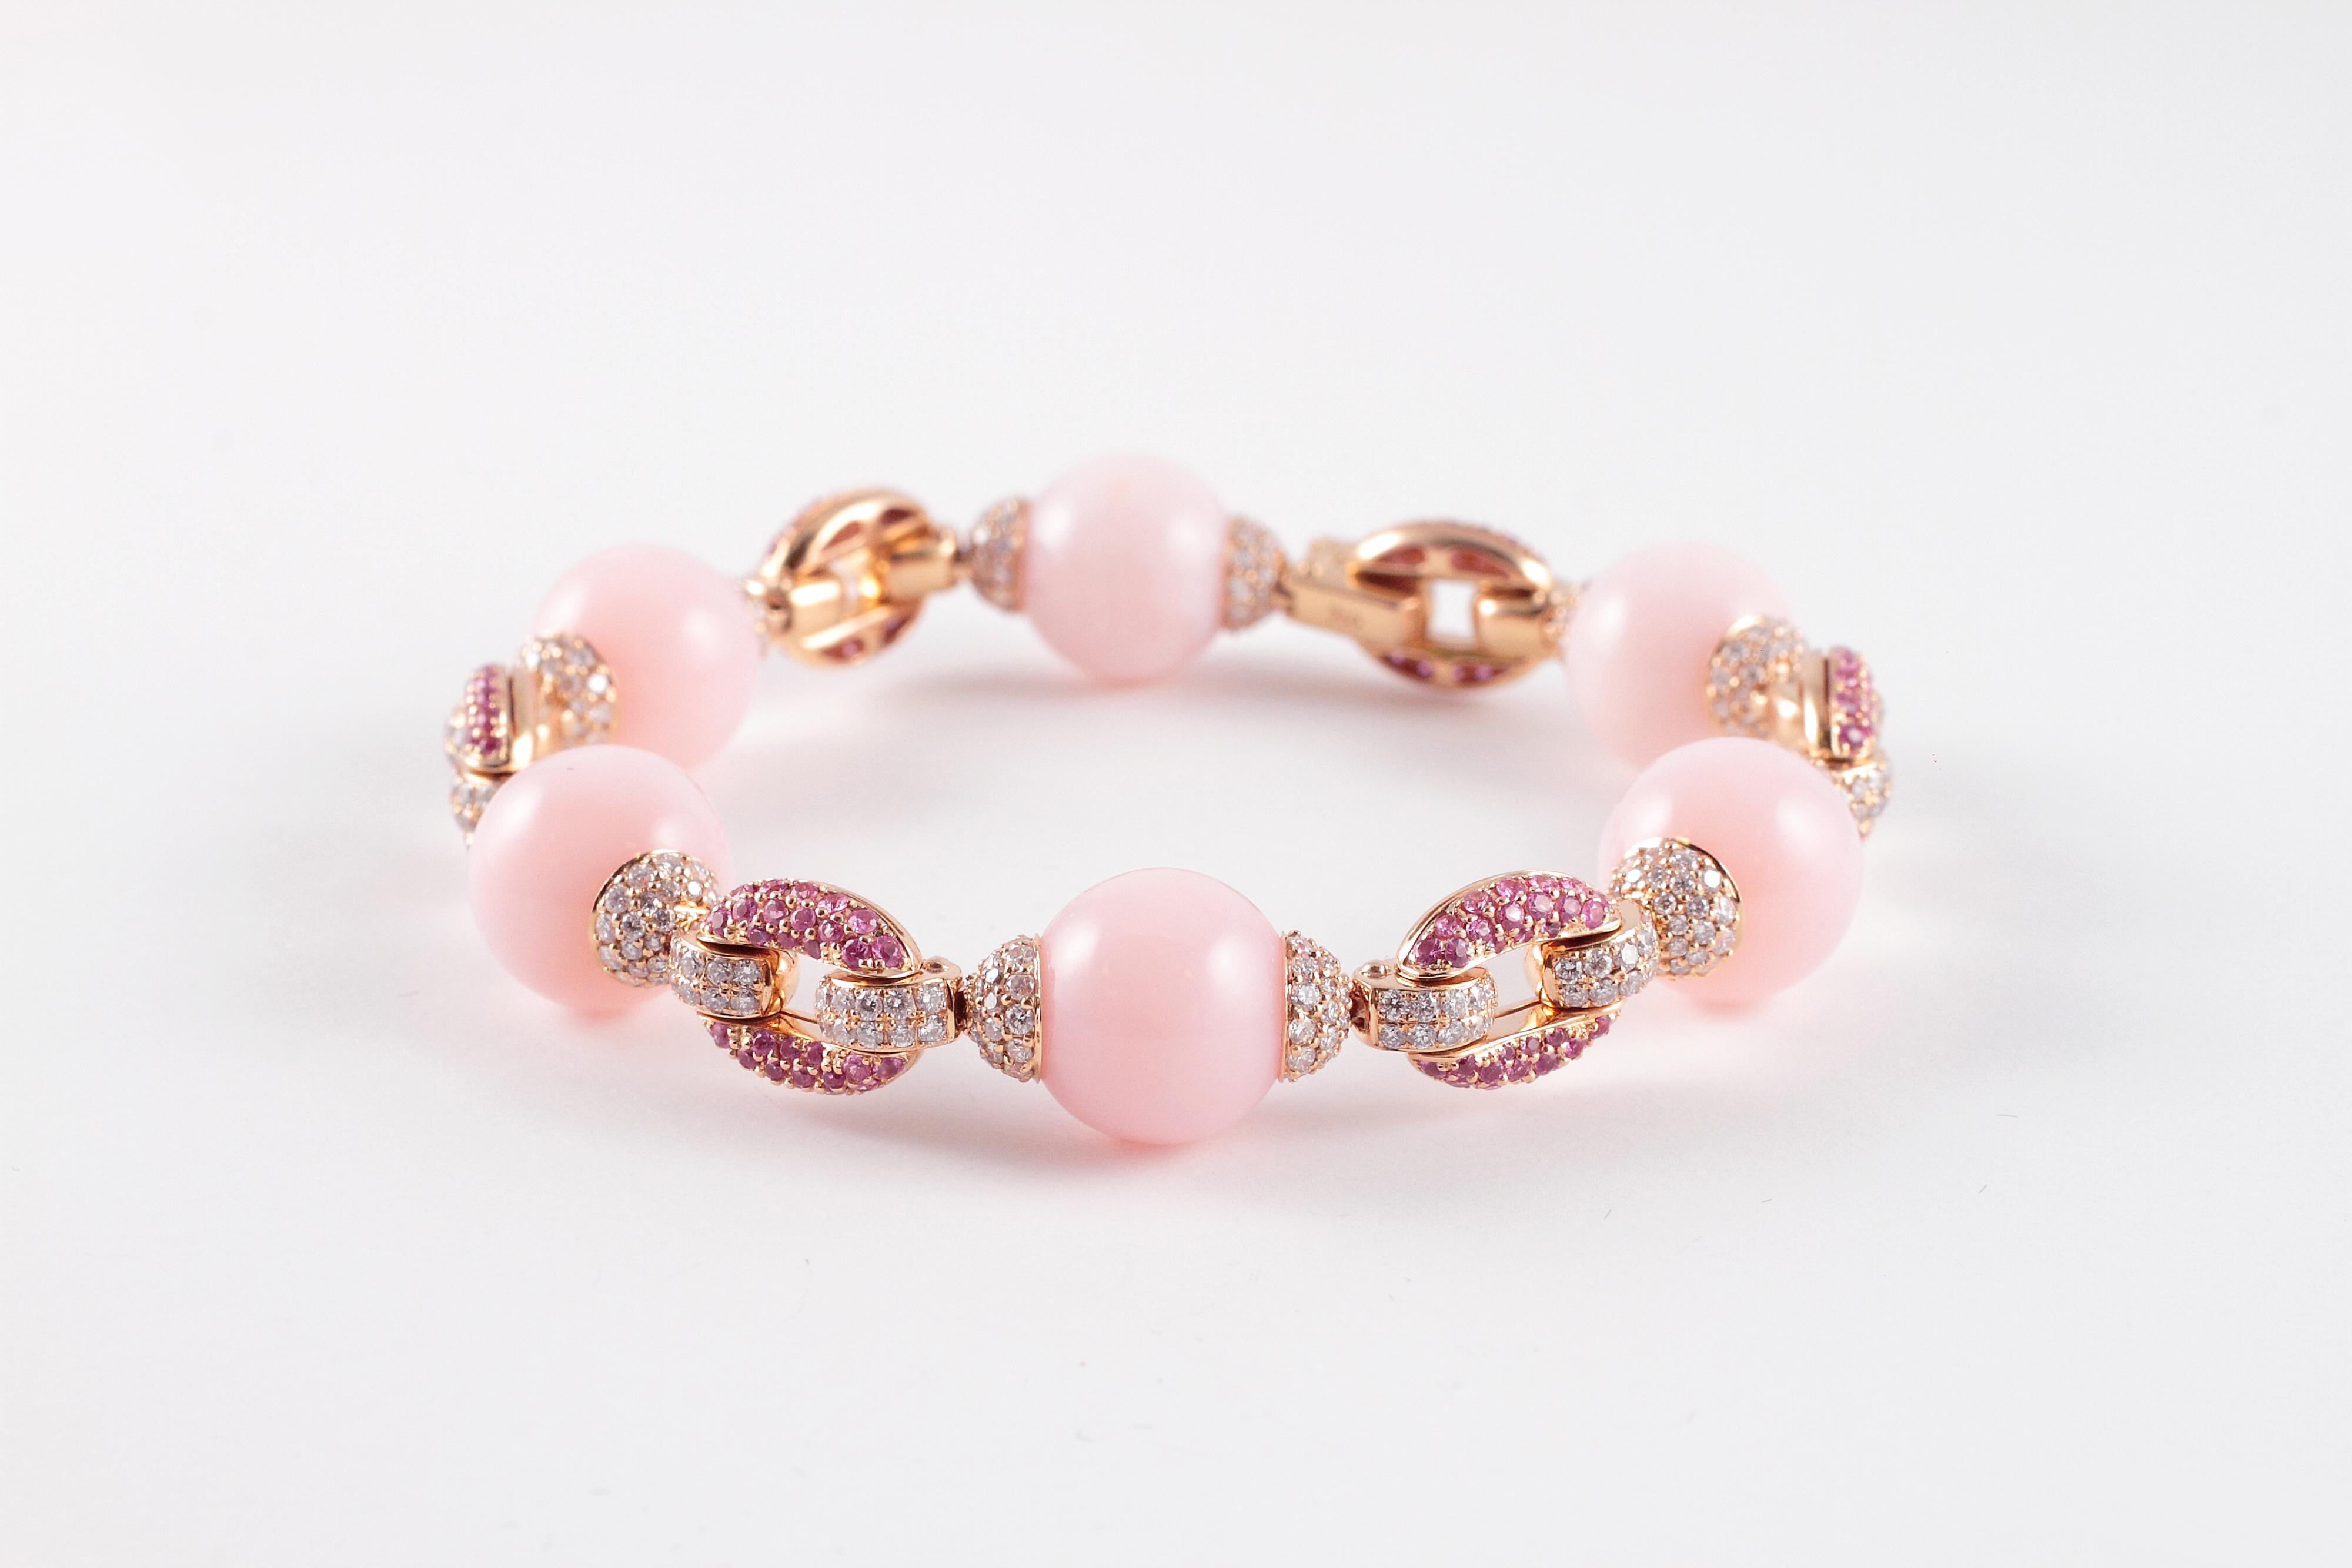 Purchased from famed jewelry designer David Morris of London, this lovely bracelet is in warm and inviting 18 karat rose gold and the pink color in the six beautifully matched opals is complimented by the bright sparkle of the 2.14 carats of pink